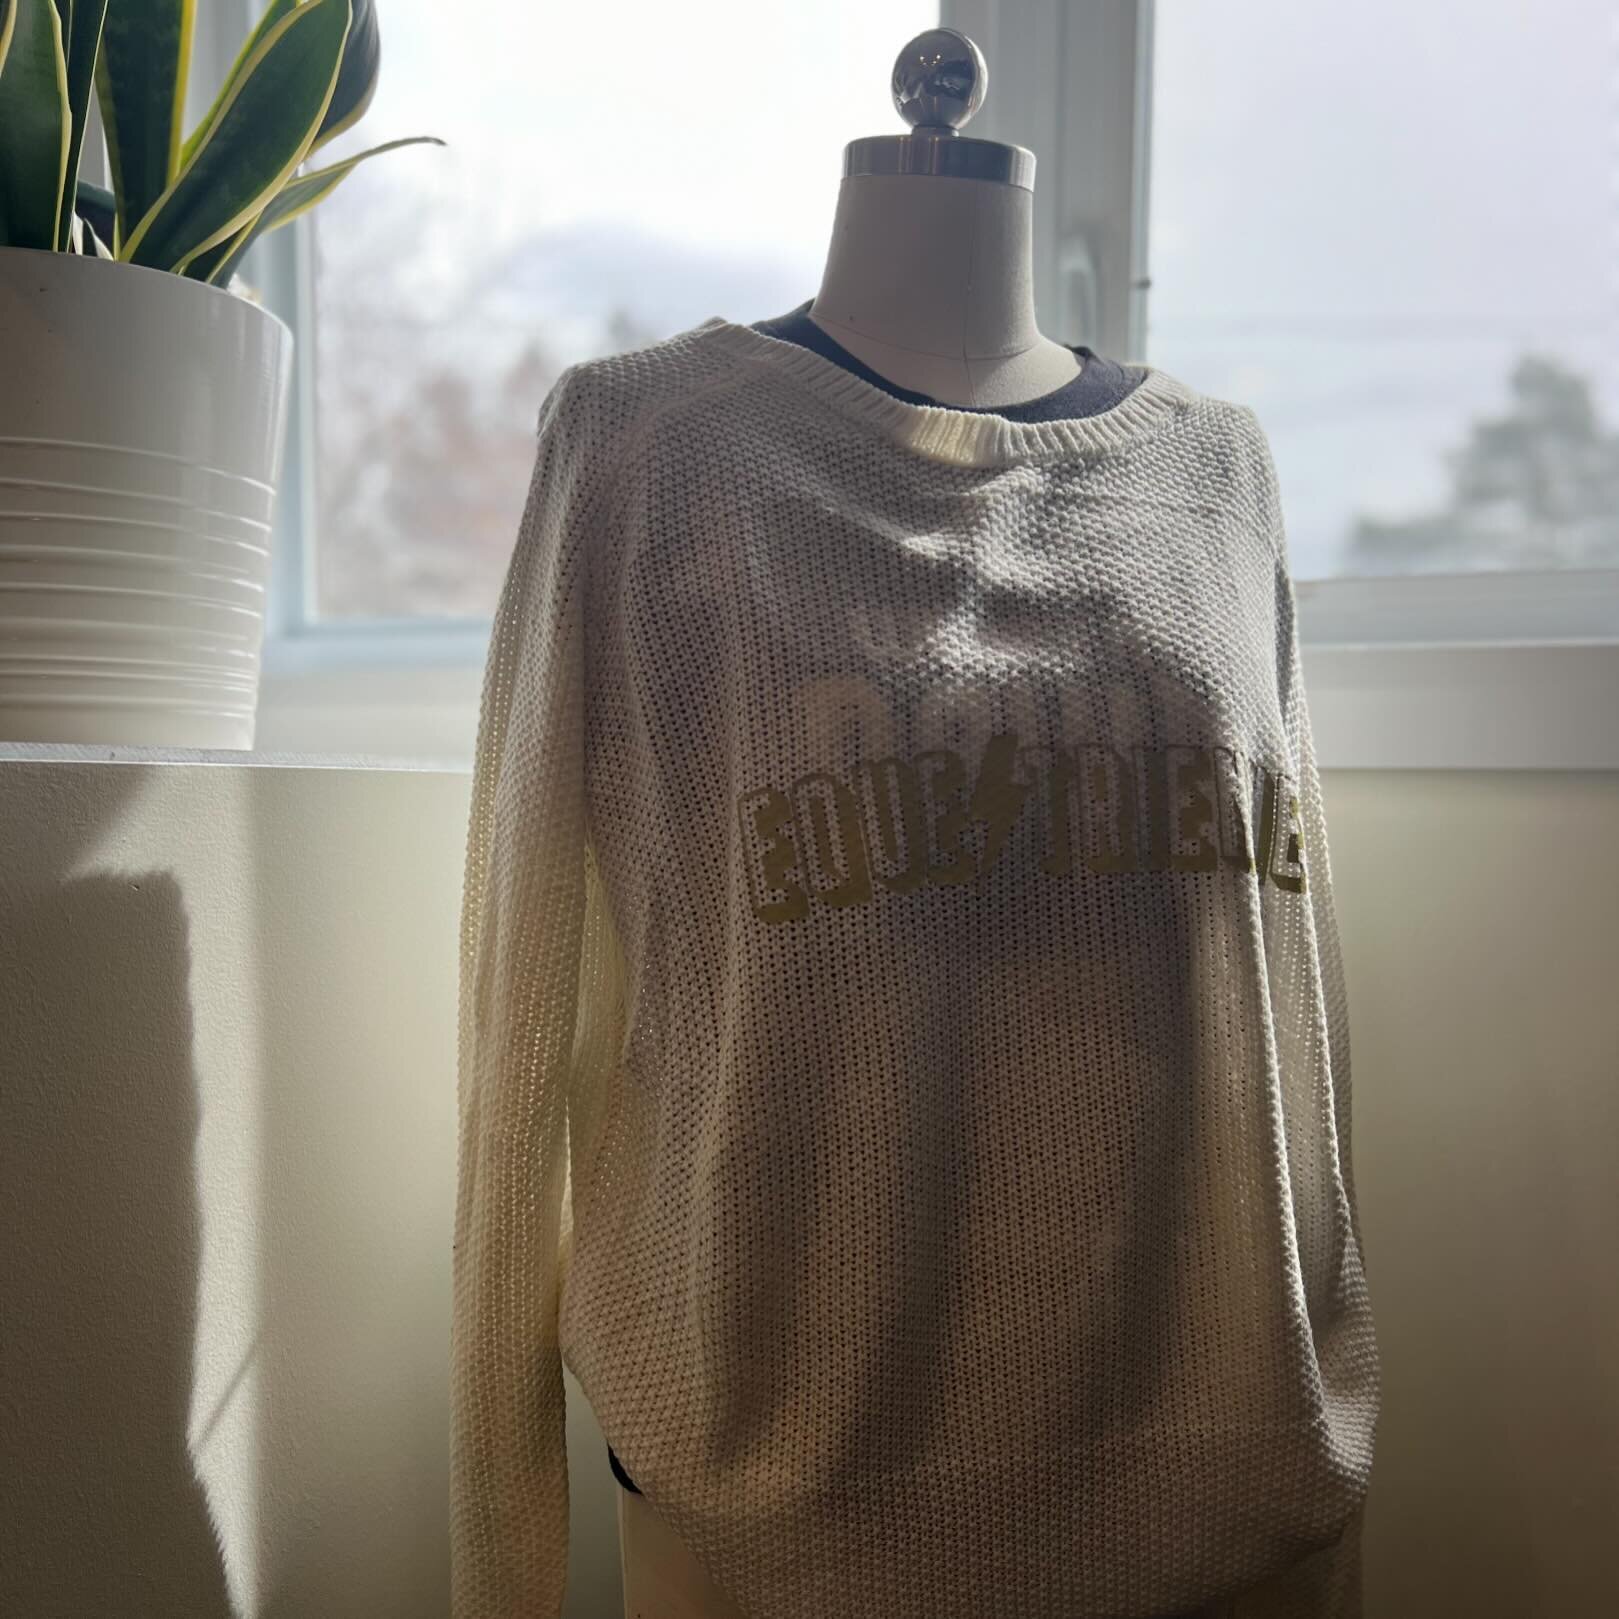 When the light is just right 🌞 #PhyllisStein #upcycled #upcycledclothing #equestrienne #shop-small